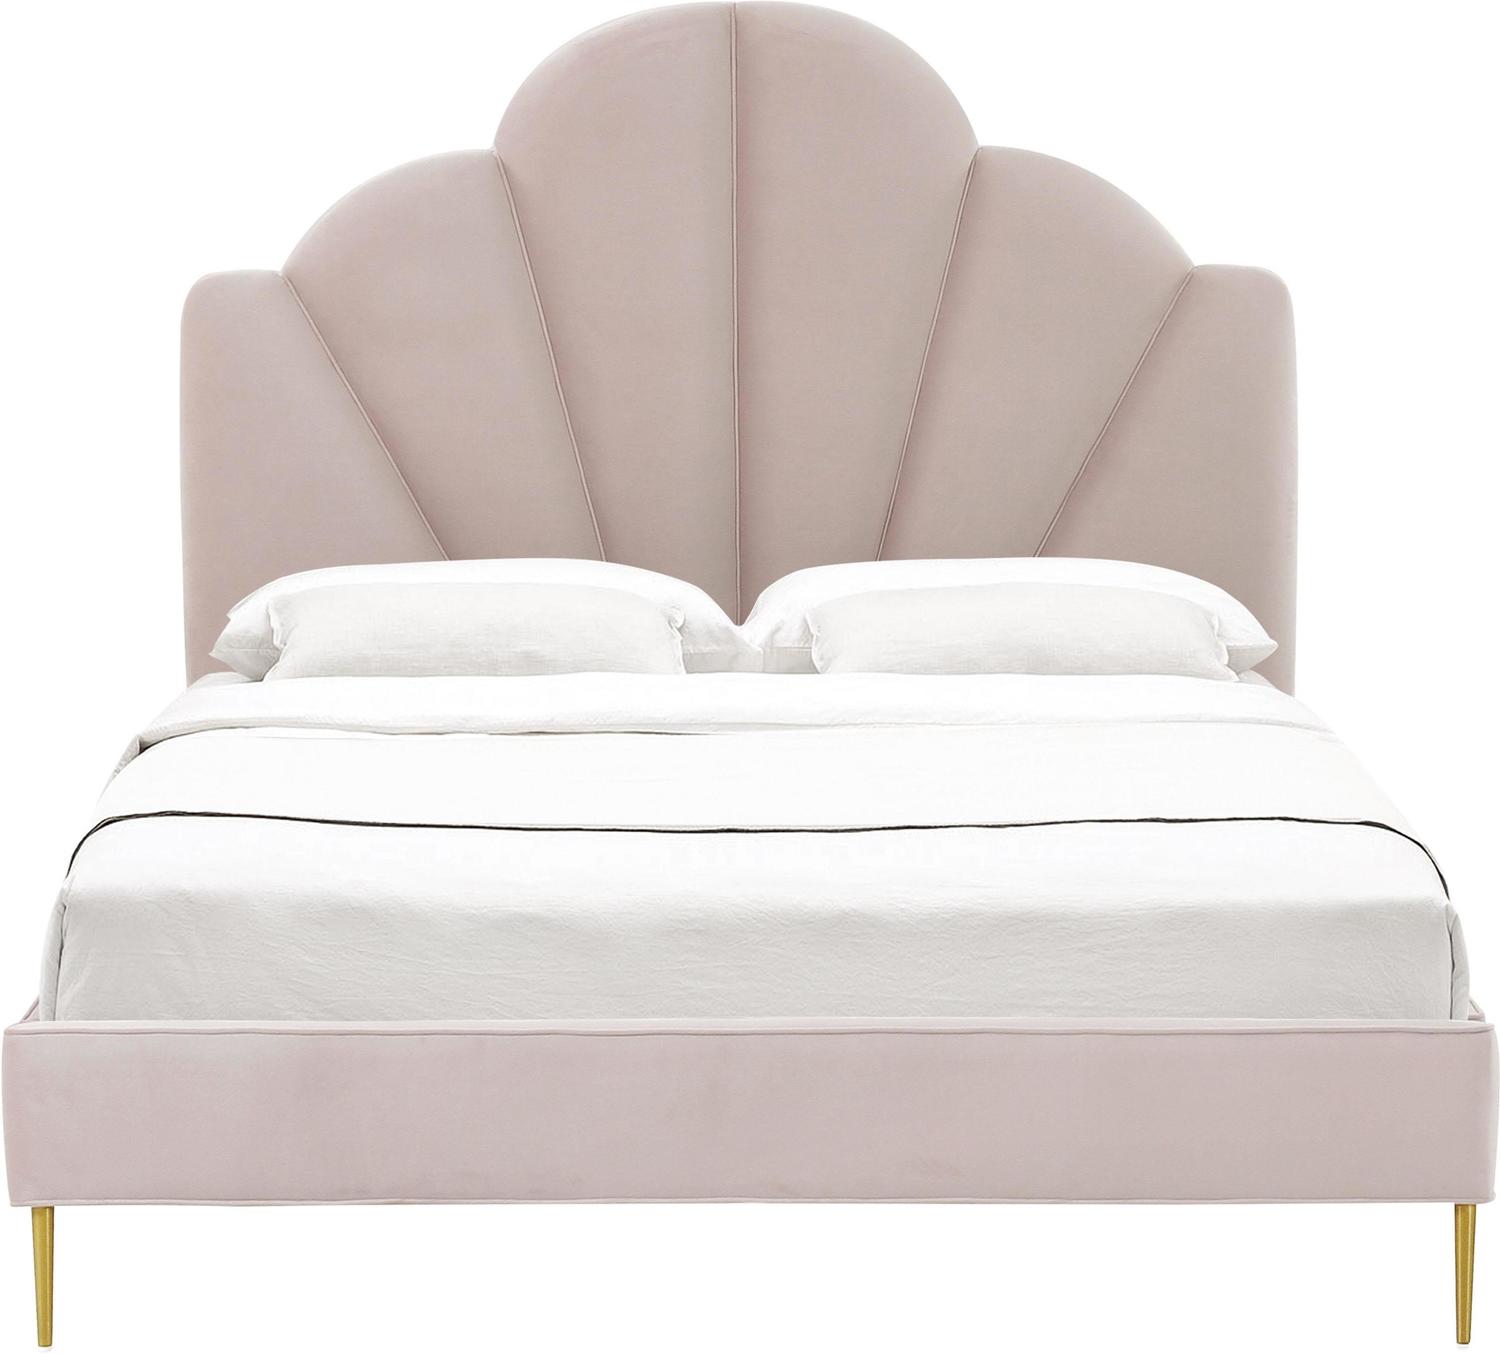 queen fabric headboard and frame Tov Furniture Beds Blush